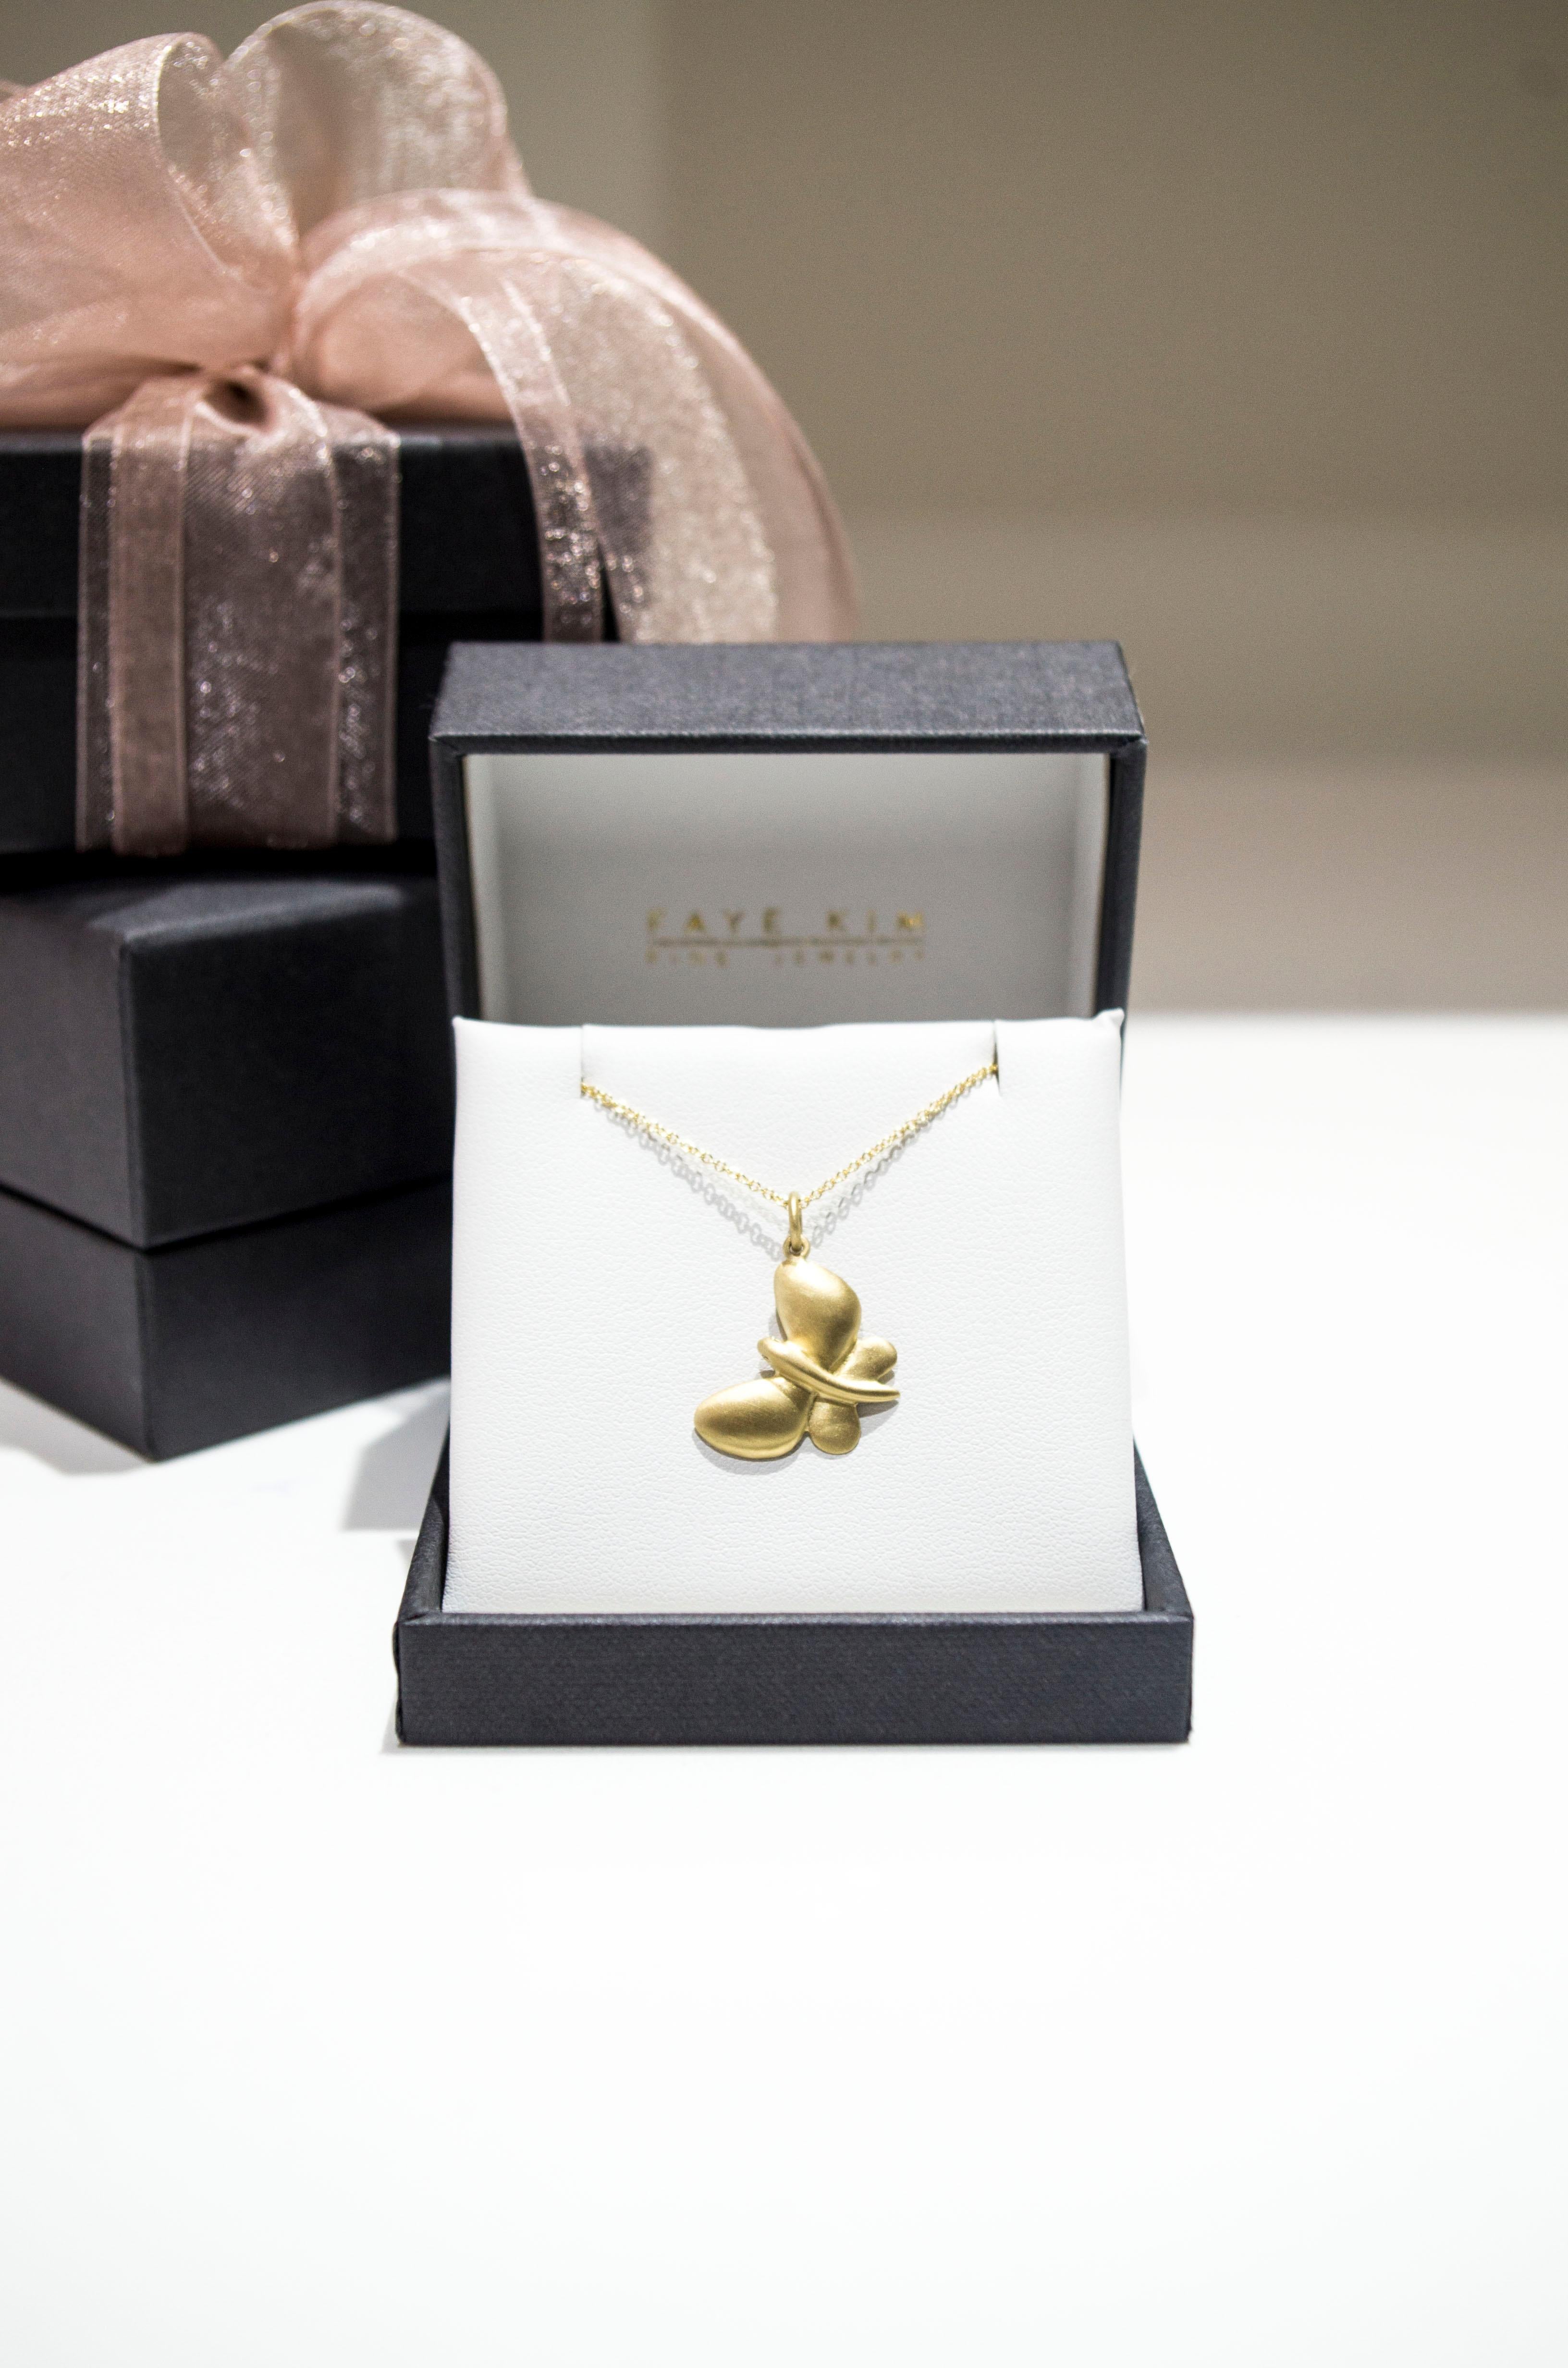 Contemporary Faye Kim 18k Gold Diamond Butterfly Charm Necklace For Sale